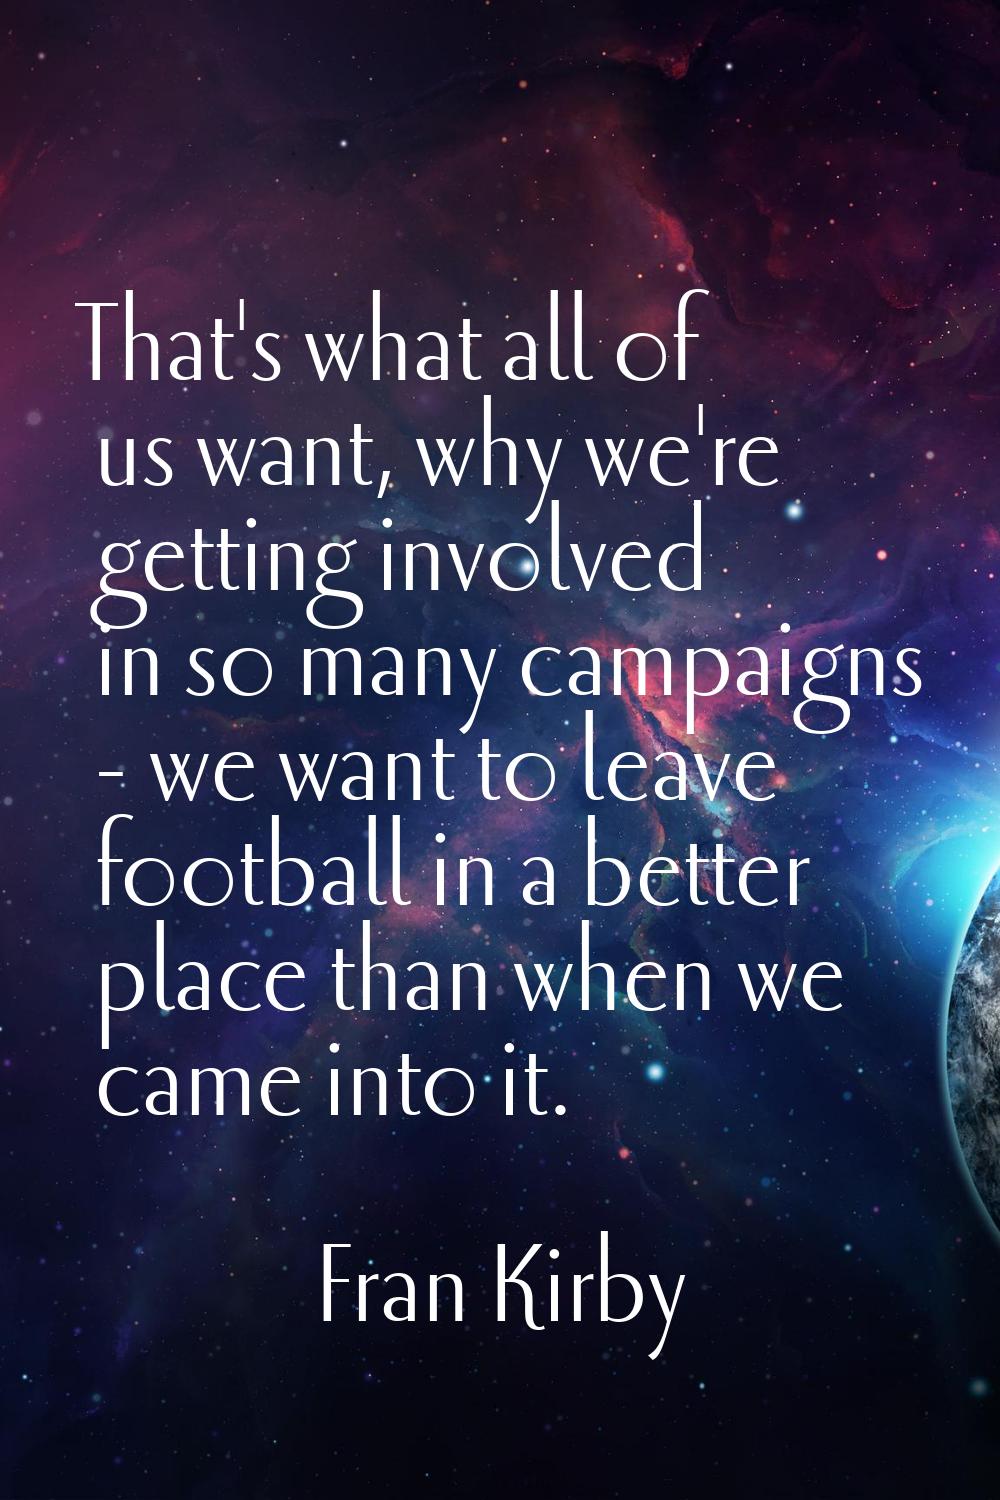 That's what all of us want, why we're getting involved in so many campaigns - we want to leave foot